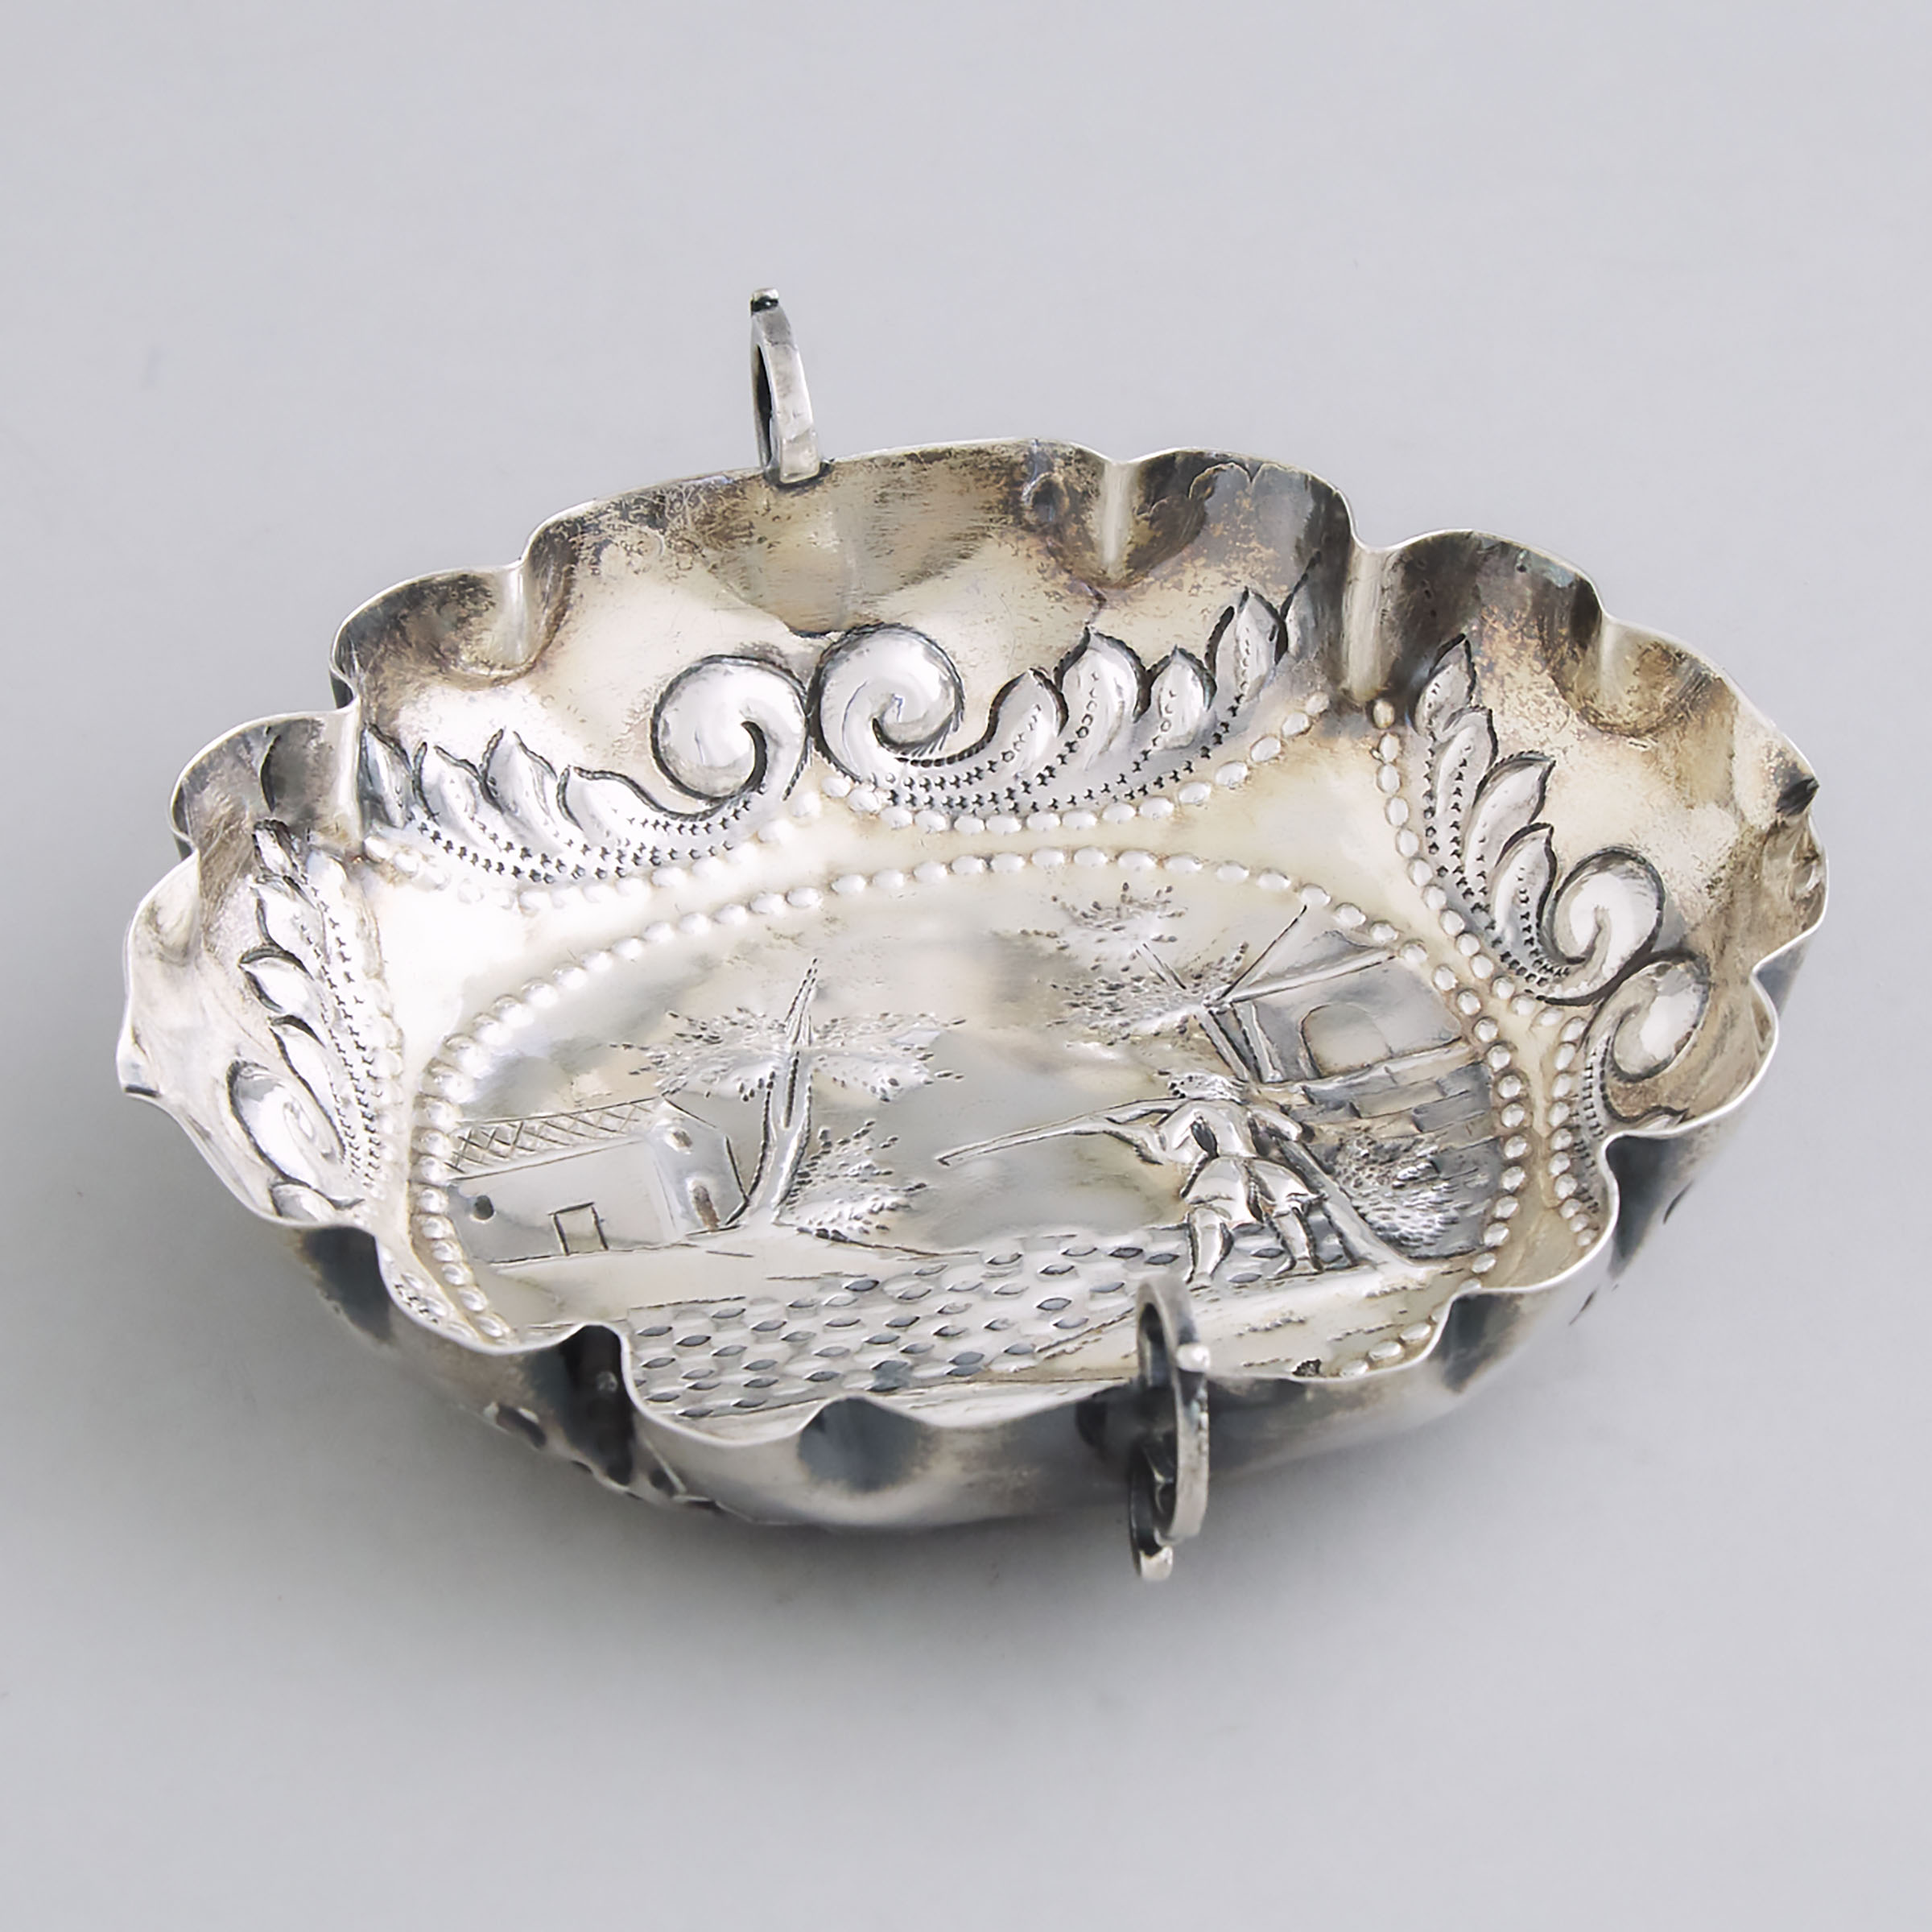 German Silver Parcel-Gilt Two-Handled Lobed Oval Brandy Bowl, Augsburg, 18th century